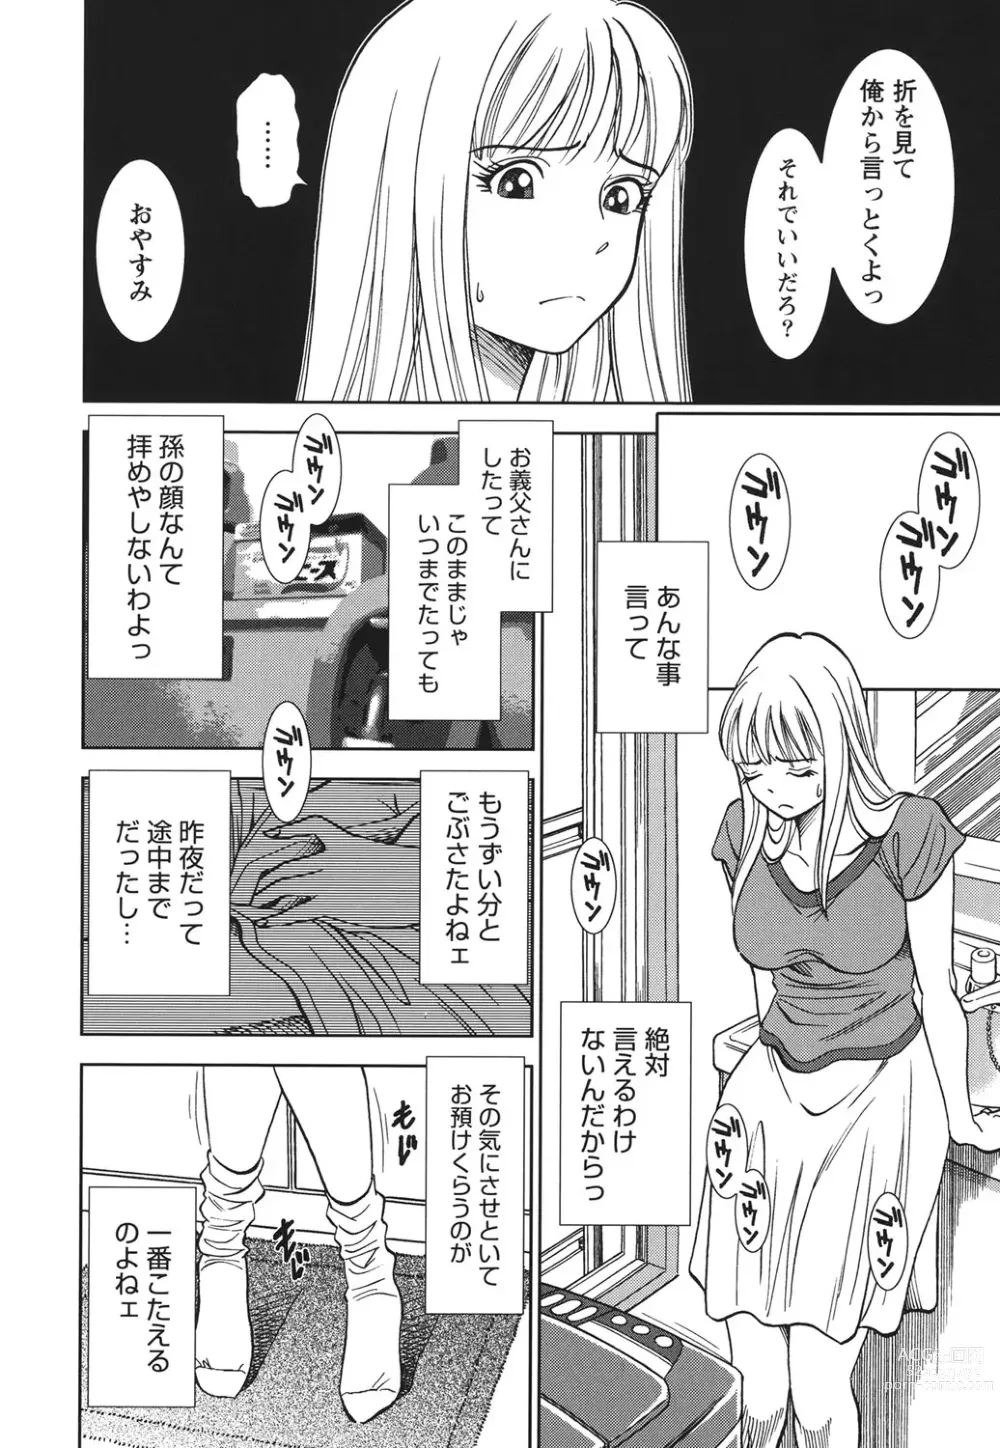 Page 9 of manga Haitoku no Meikyuu - a married woman got lost in the labyrinth of immorality